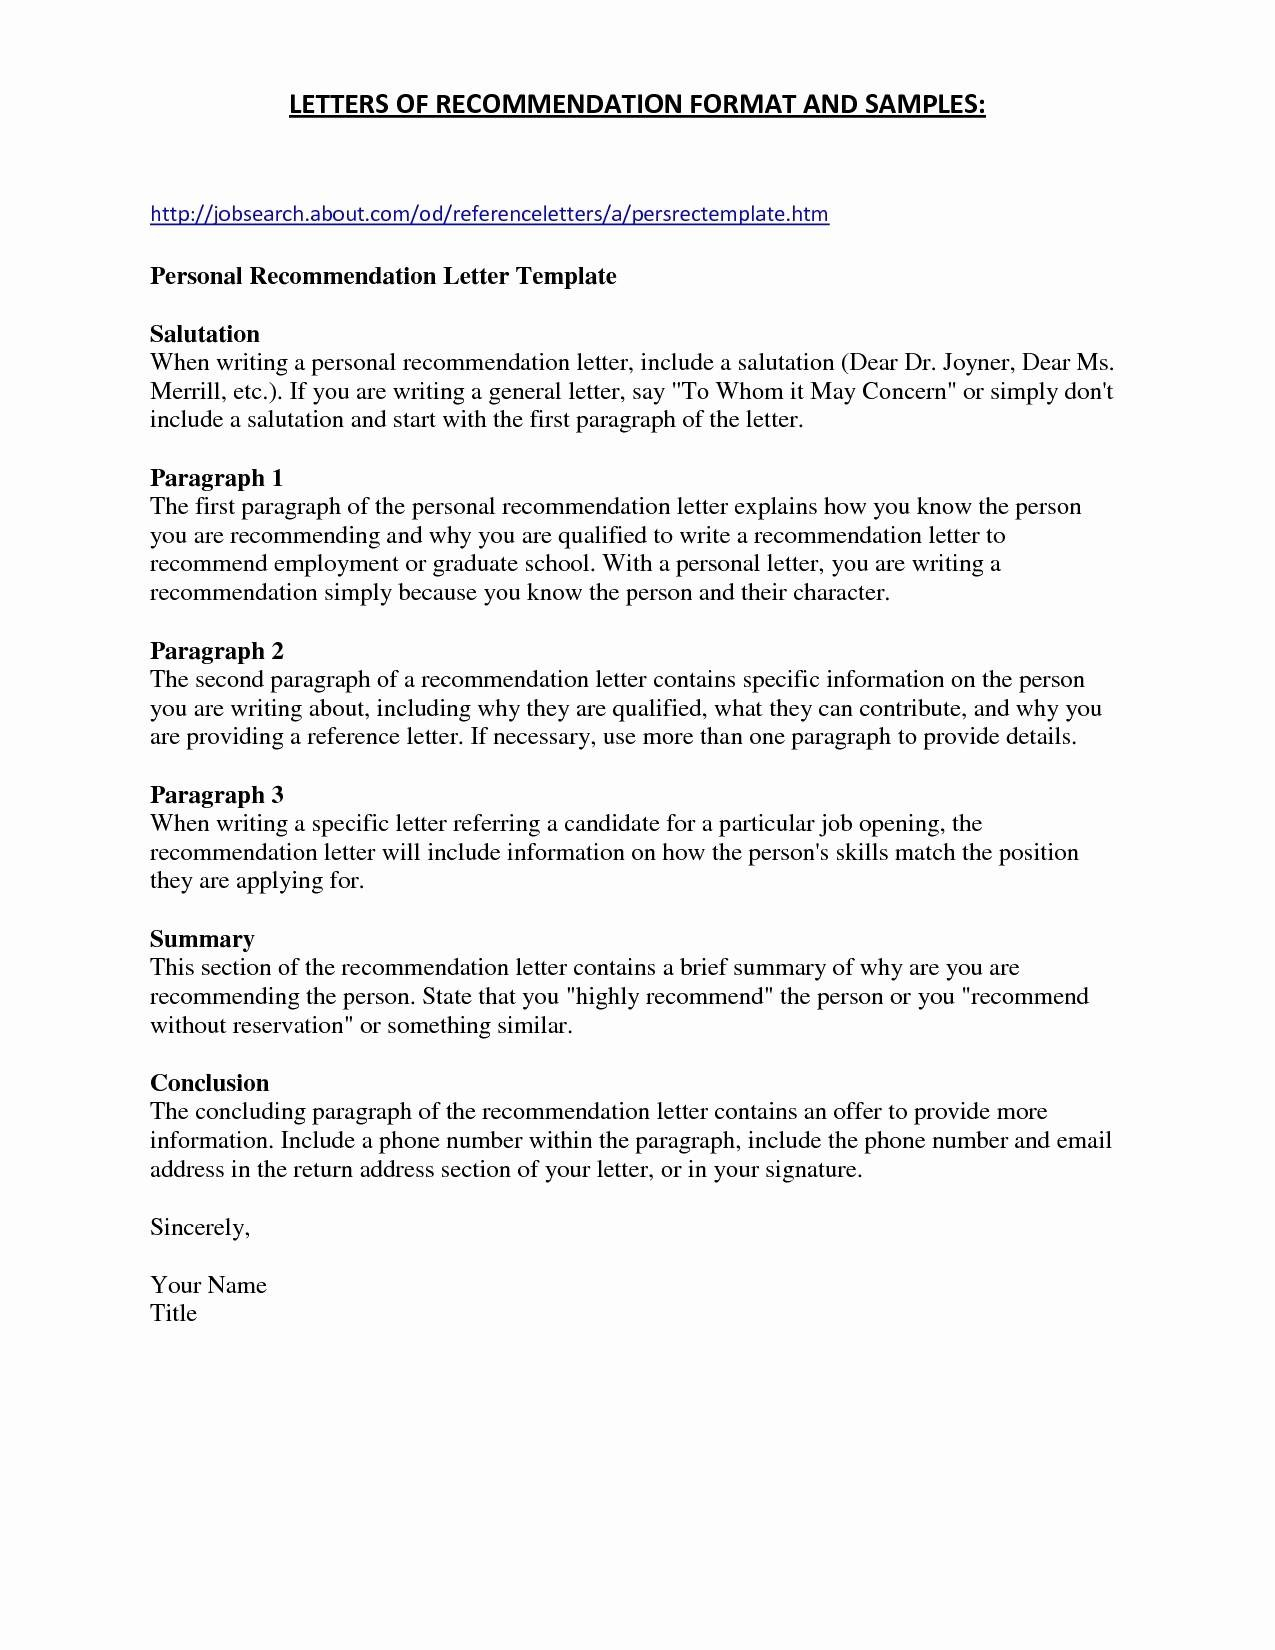 Rental Cover Letter Template - How to Write A Cover Letter for A Rental Application